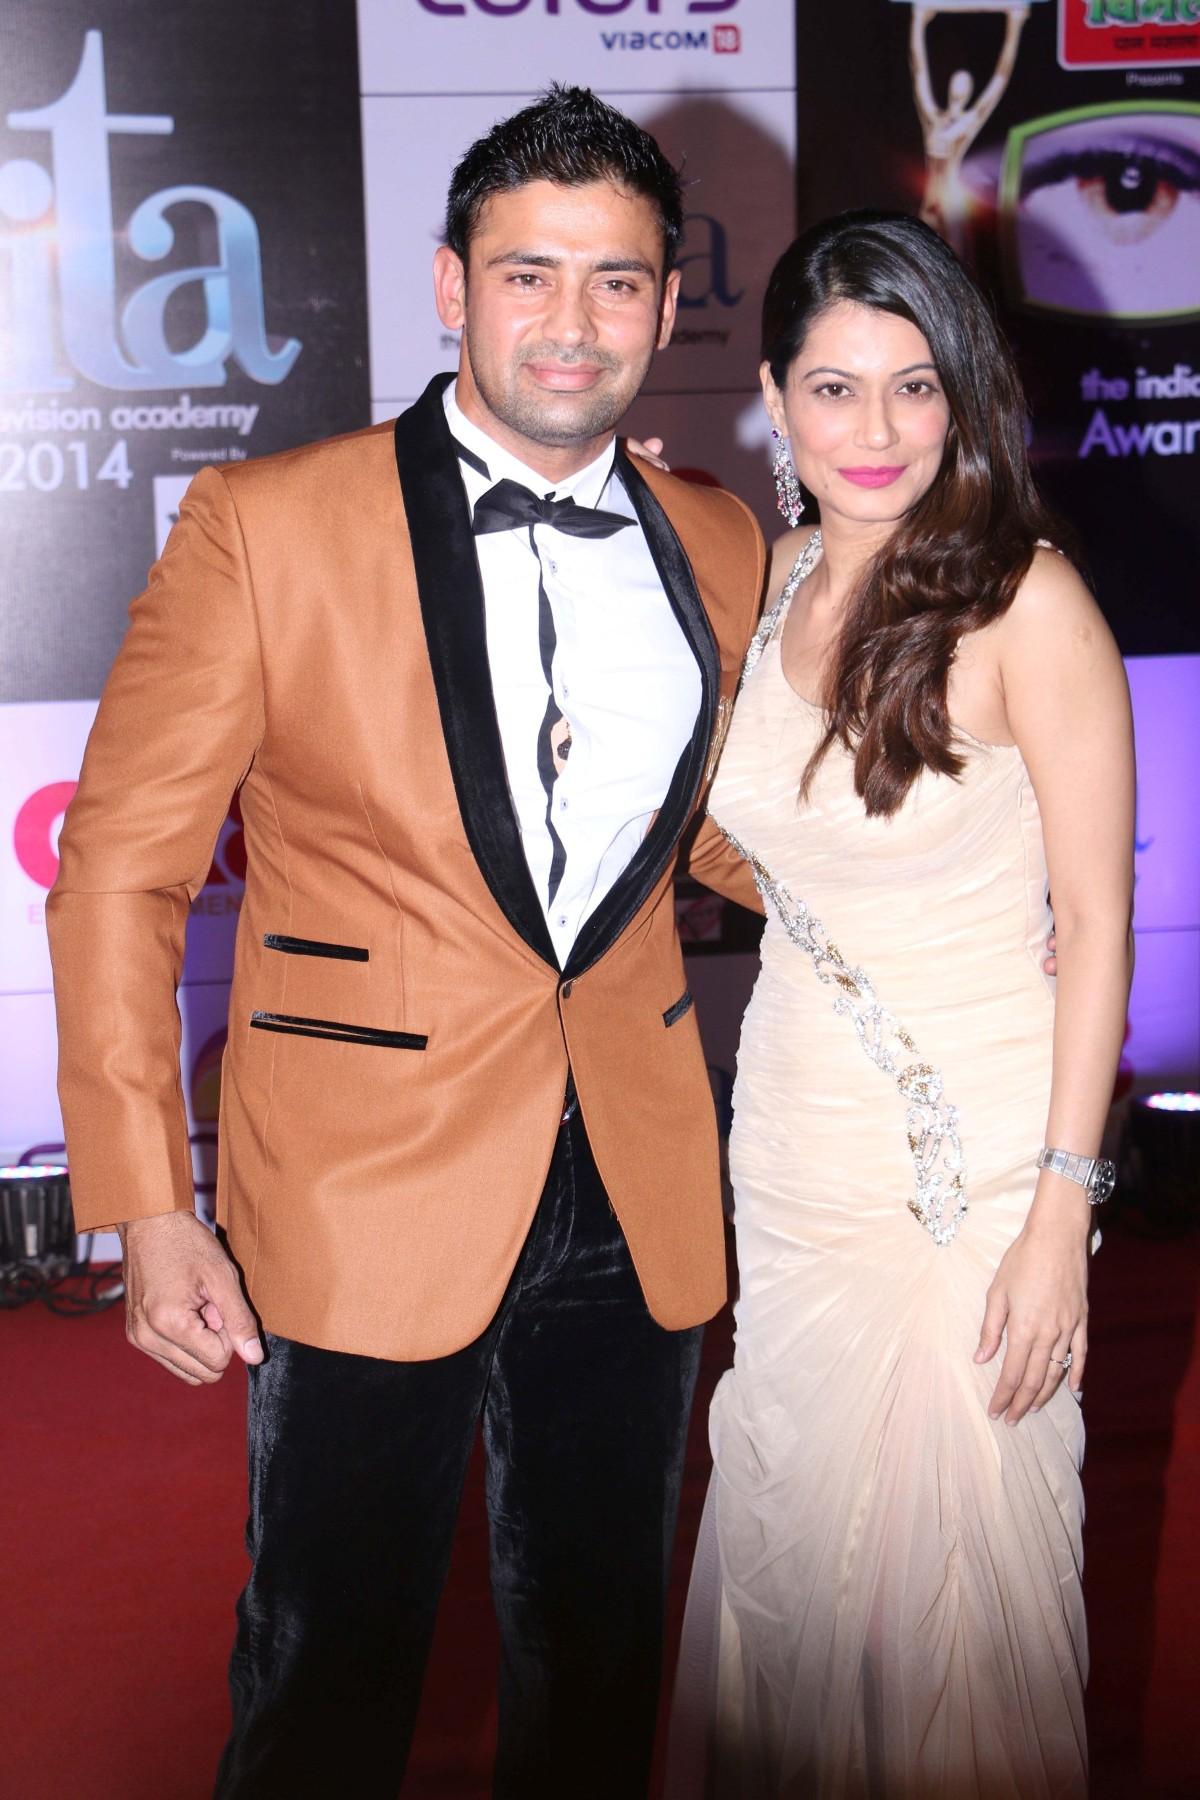 14th Indian Television Academy Awards 2014